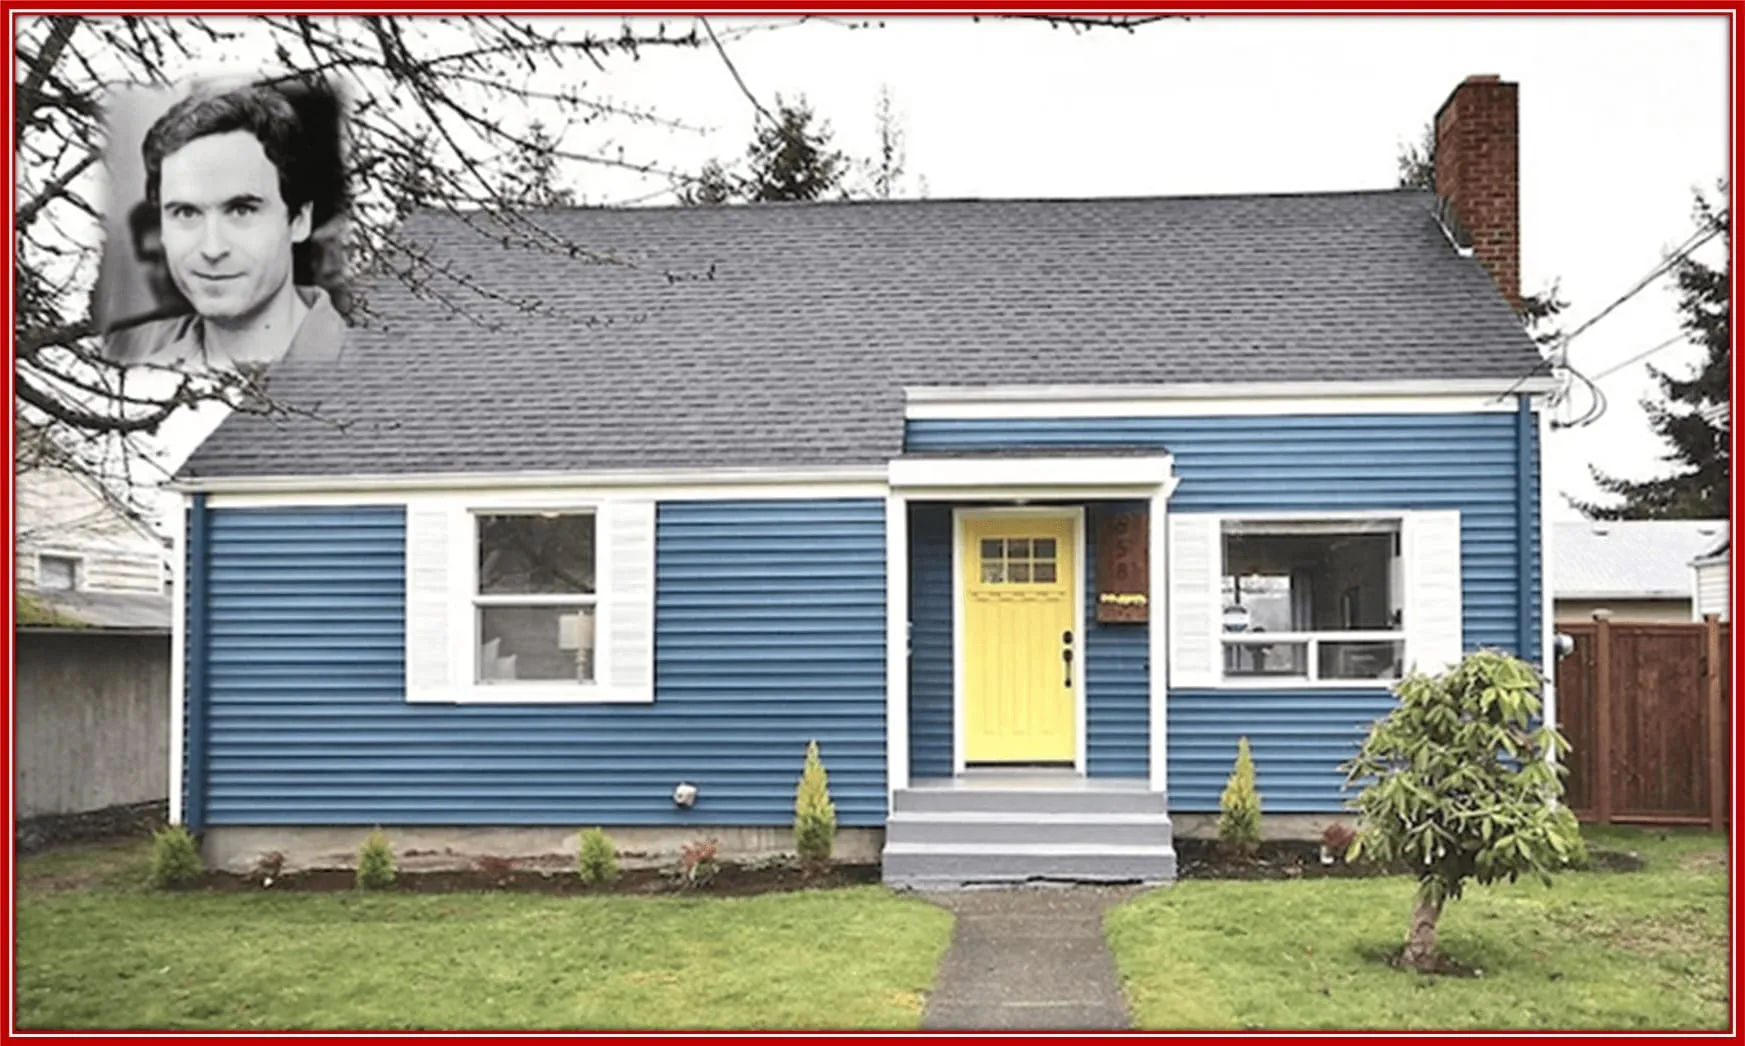 The $334,719 worth-baby blue home was Ted Bundy's residence.